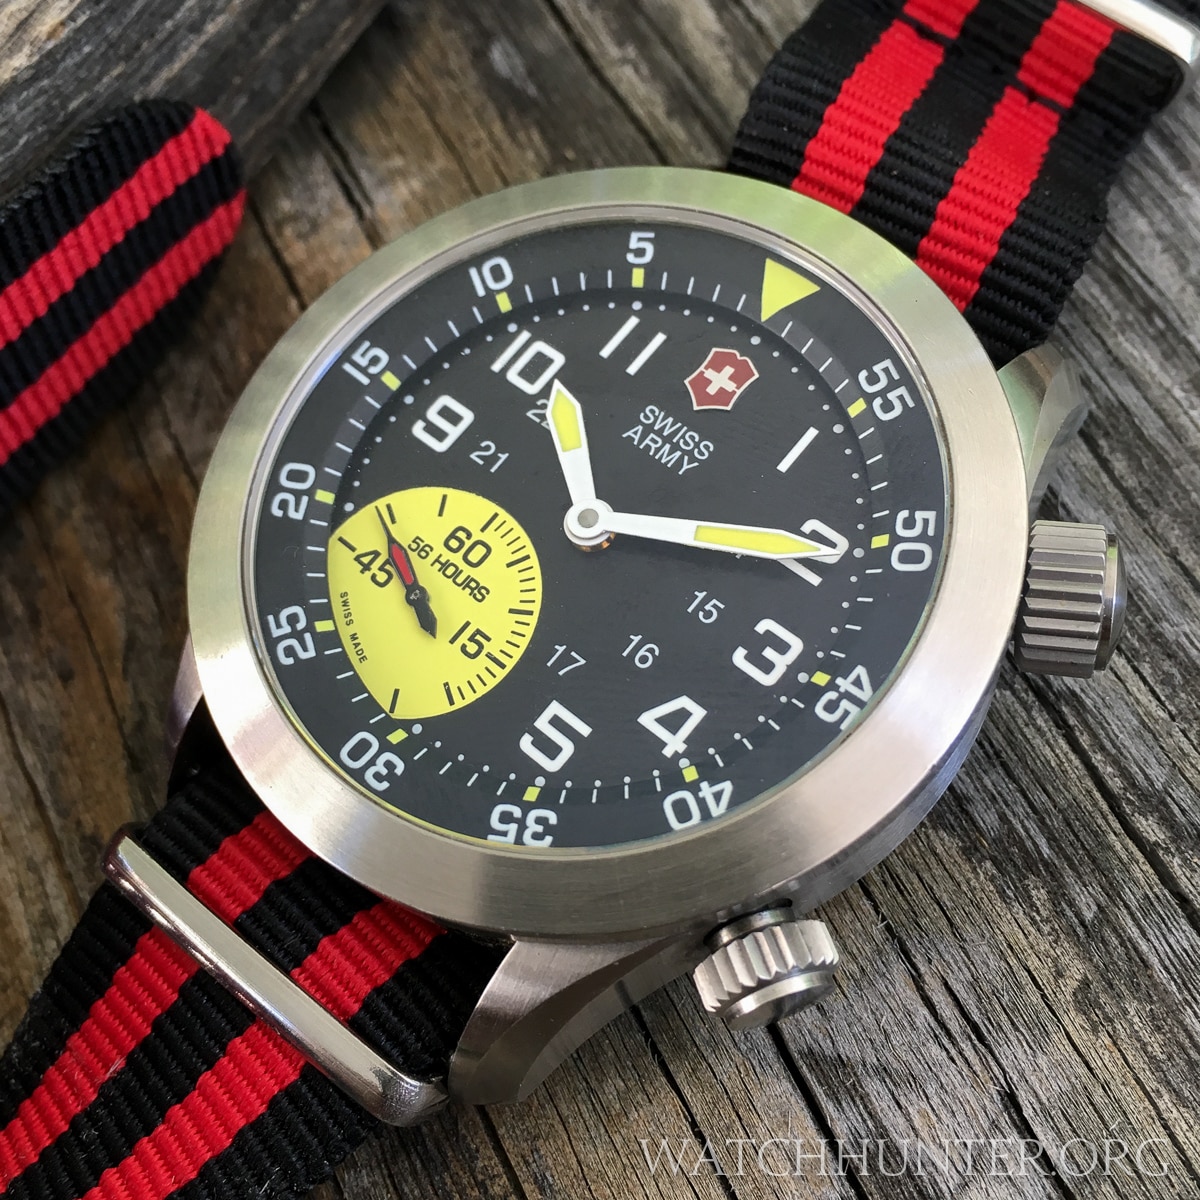 The Airboss Mach 4 Limted Edition has a ompressor style case with 2 crowns on aftermarket NATO strap